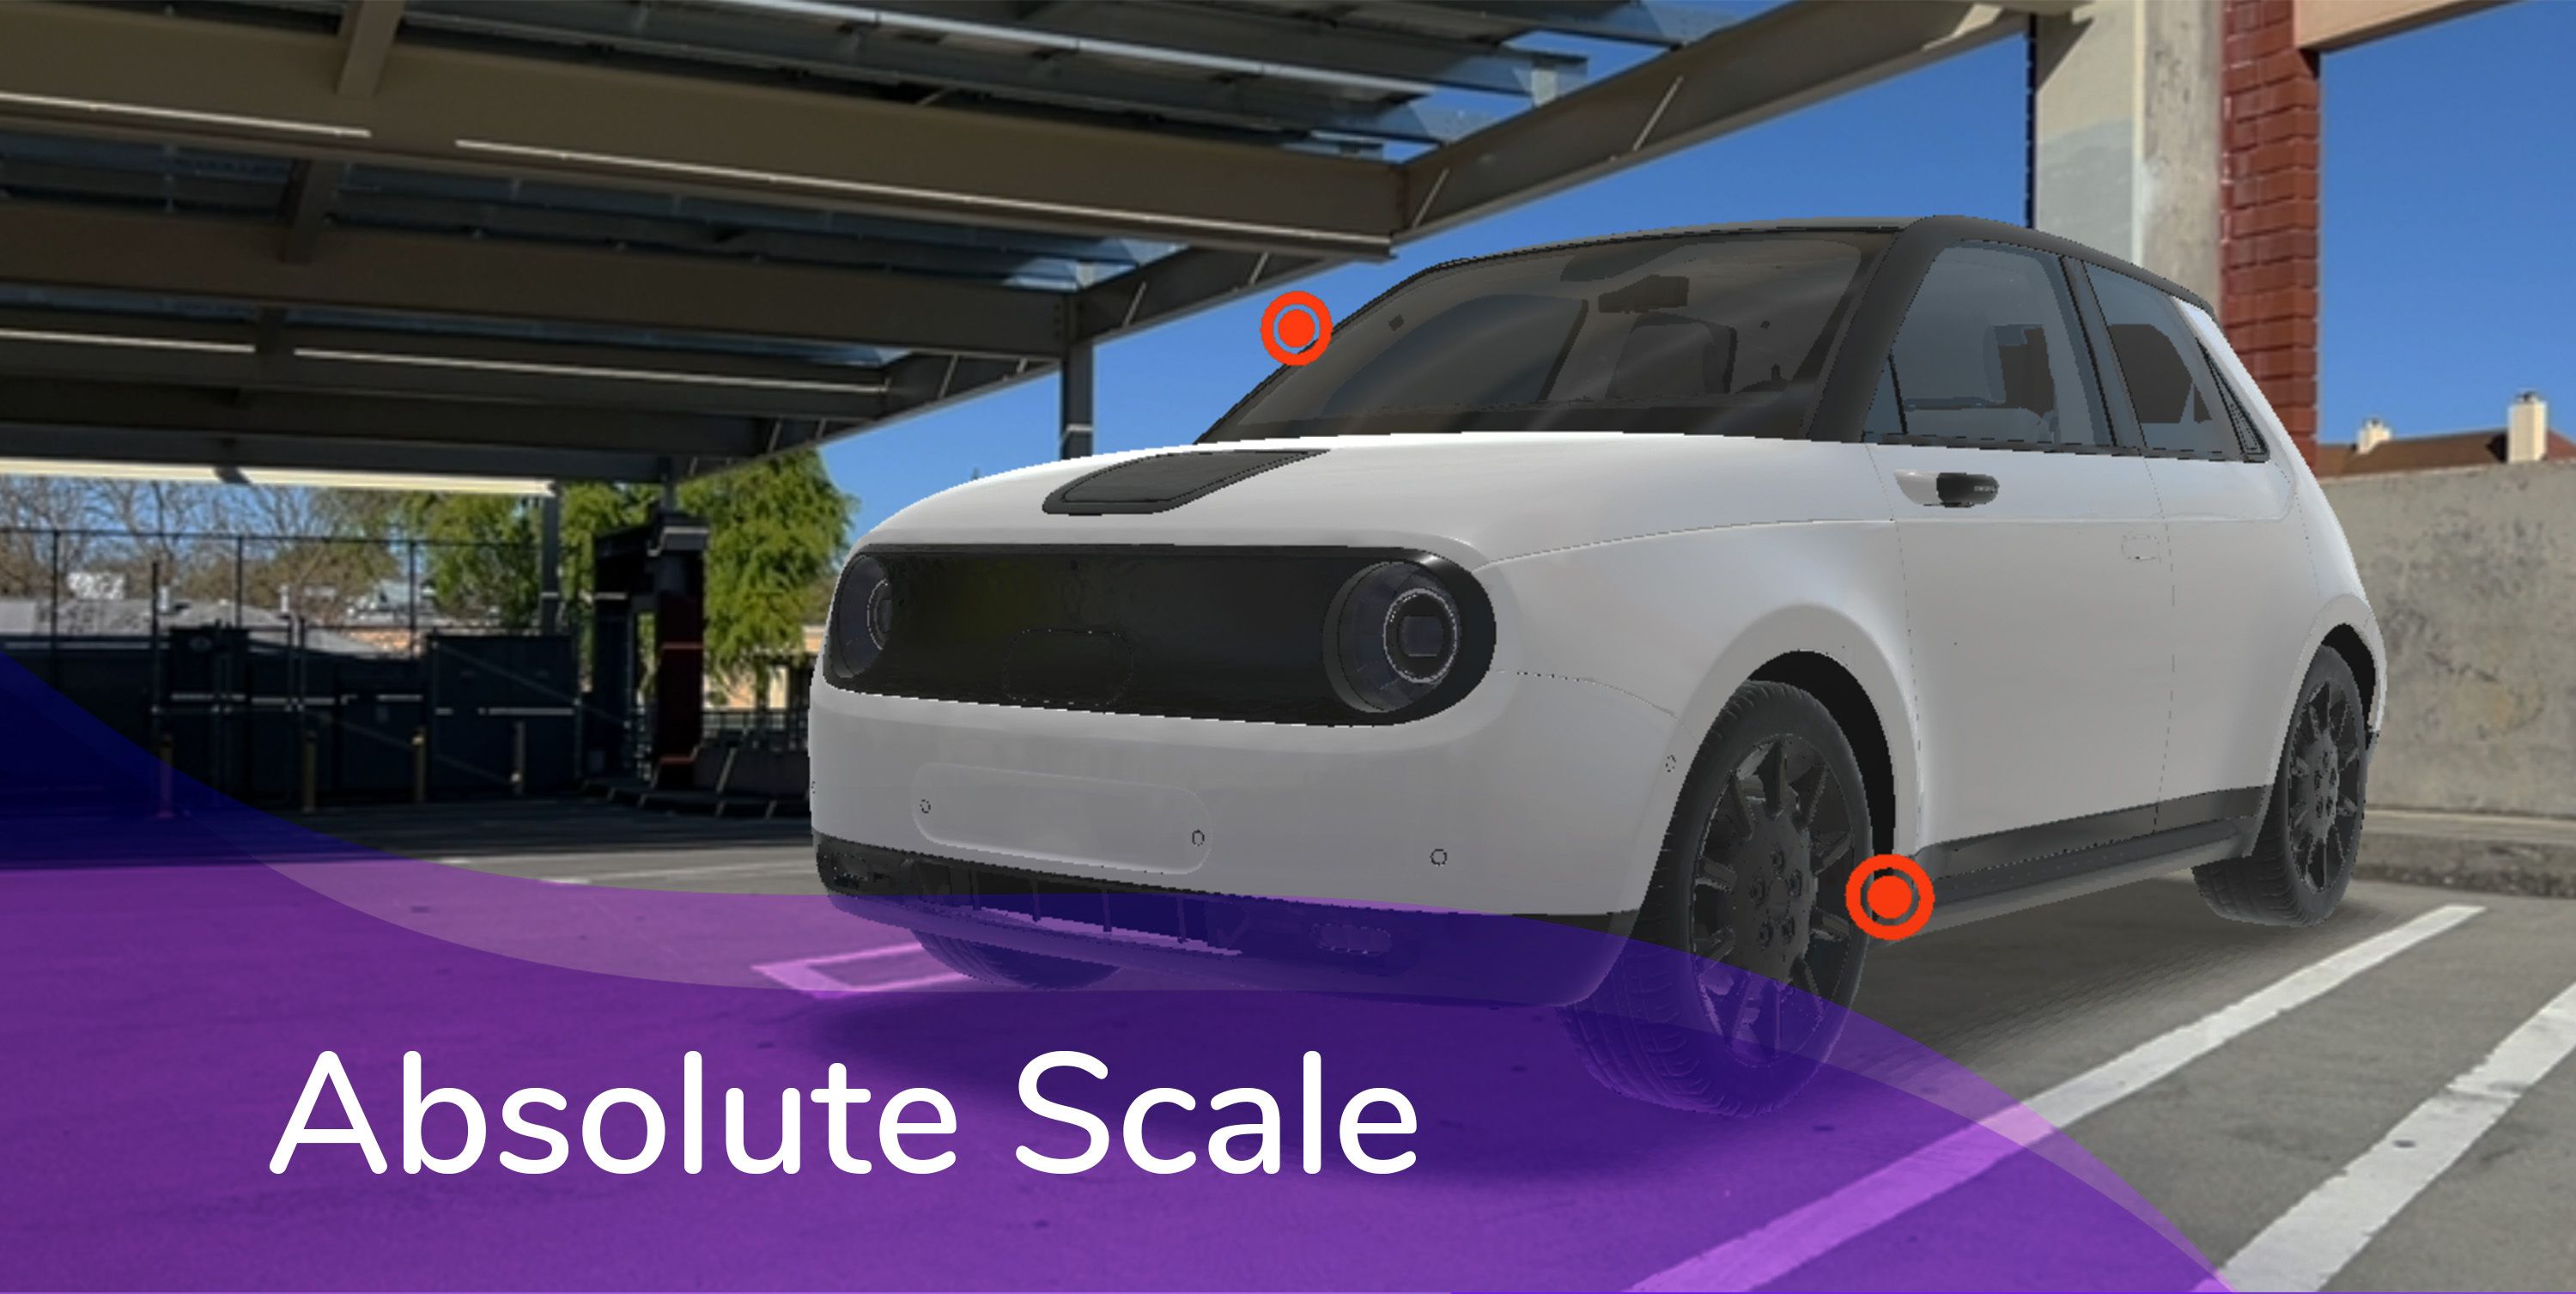 Introducing Absolute Scale